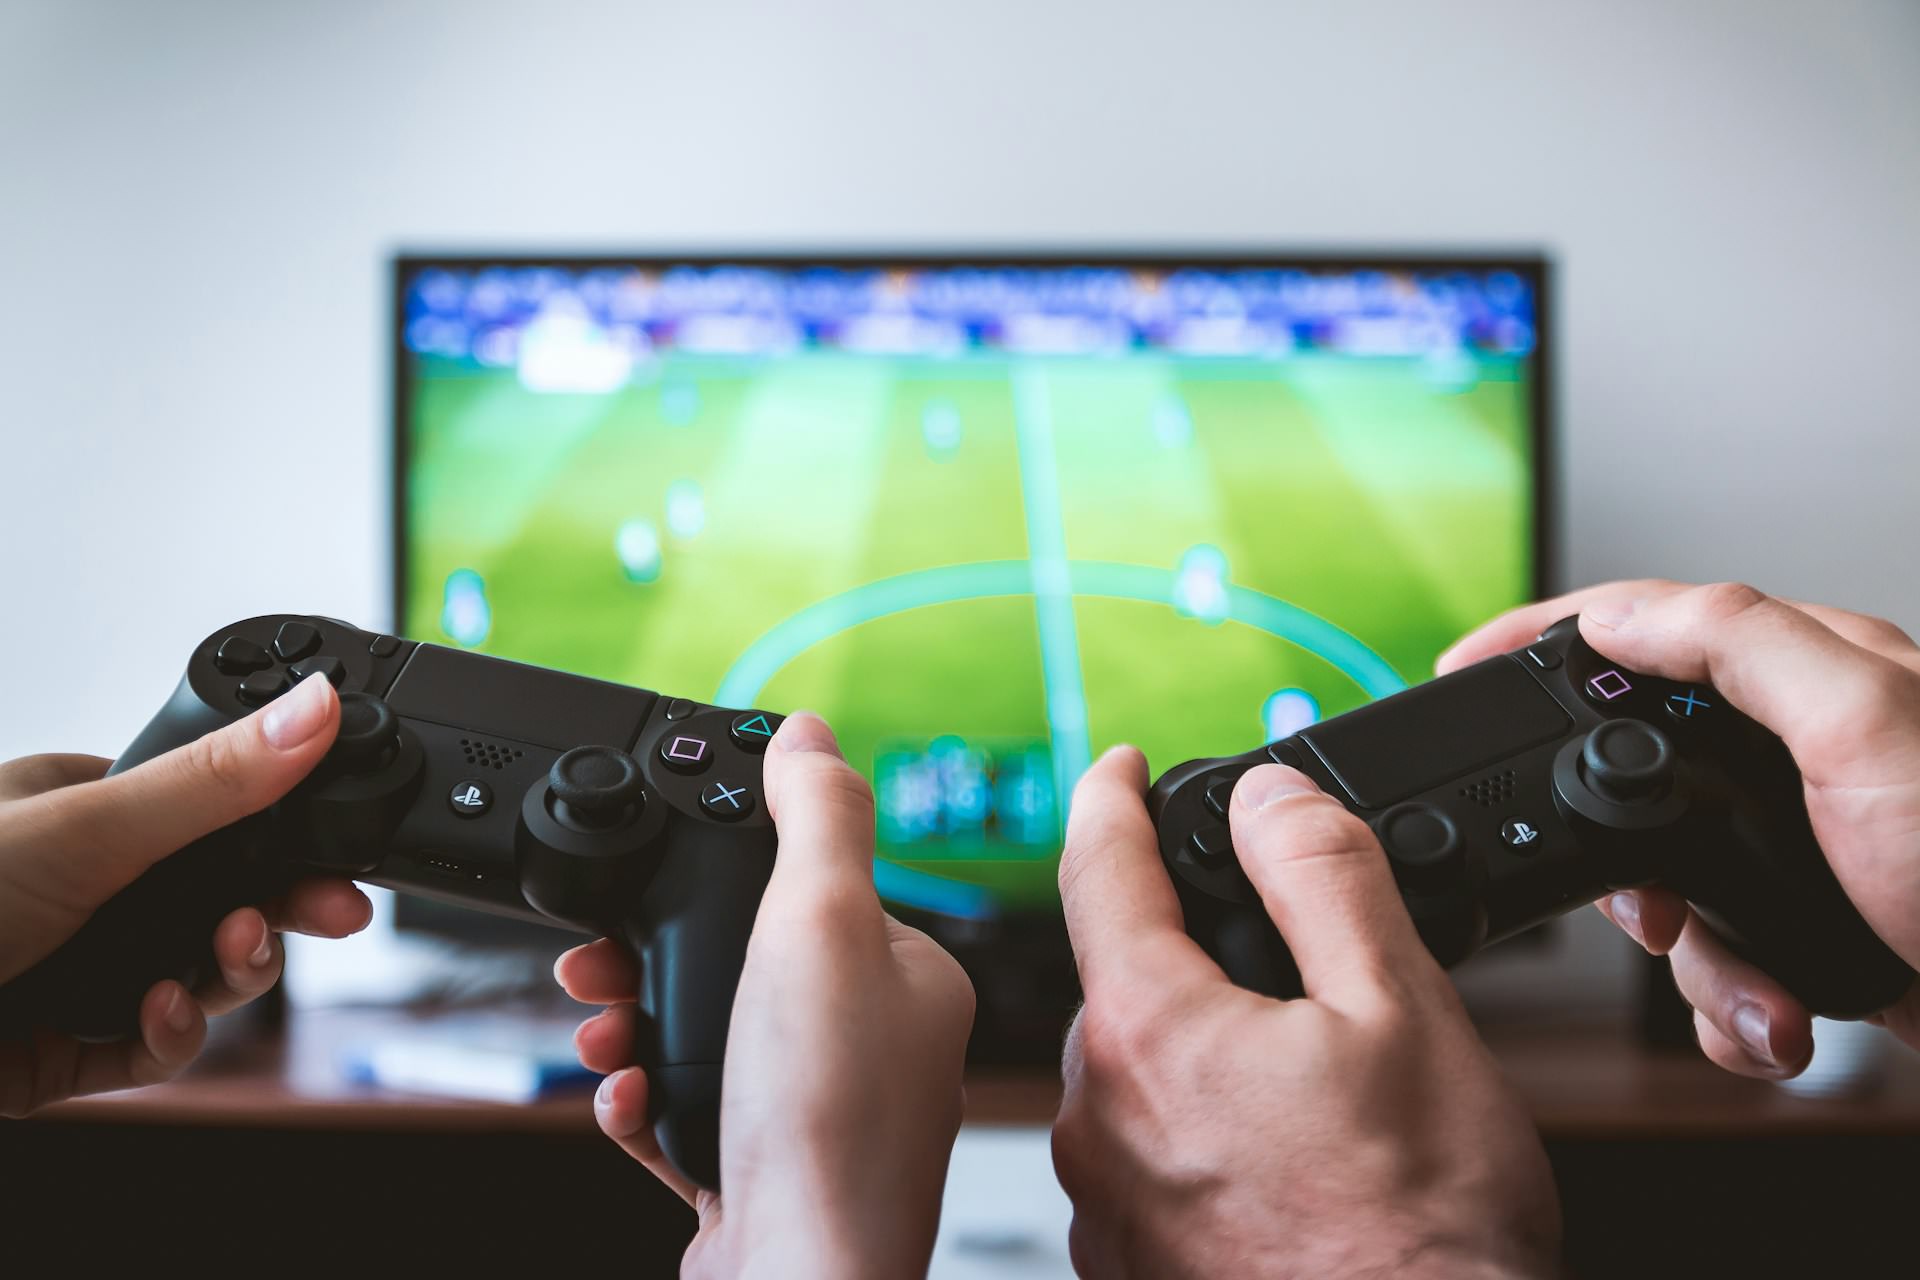 Contrary to popular belief, <a href="https://www.nih.gov/news-events/news-releases/video-gaming-may-be-associated-better-cognitive-performance-children" rel="noreferrer">moderate video game engagement can actually yield significant cognitive benefits</a>. Numerous studies have revealed that gaming can enhance memory and multitasking abilities, aid individuals with dyslexia, improve coordination, and even reduce stress levels. This surprising revelation challenges the notion that video games are merely a frivolous pastime, casting them in a new light as potential cognitive training tools.